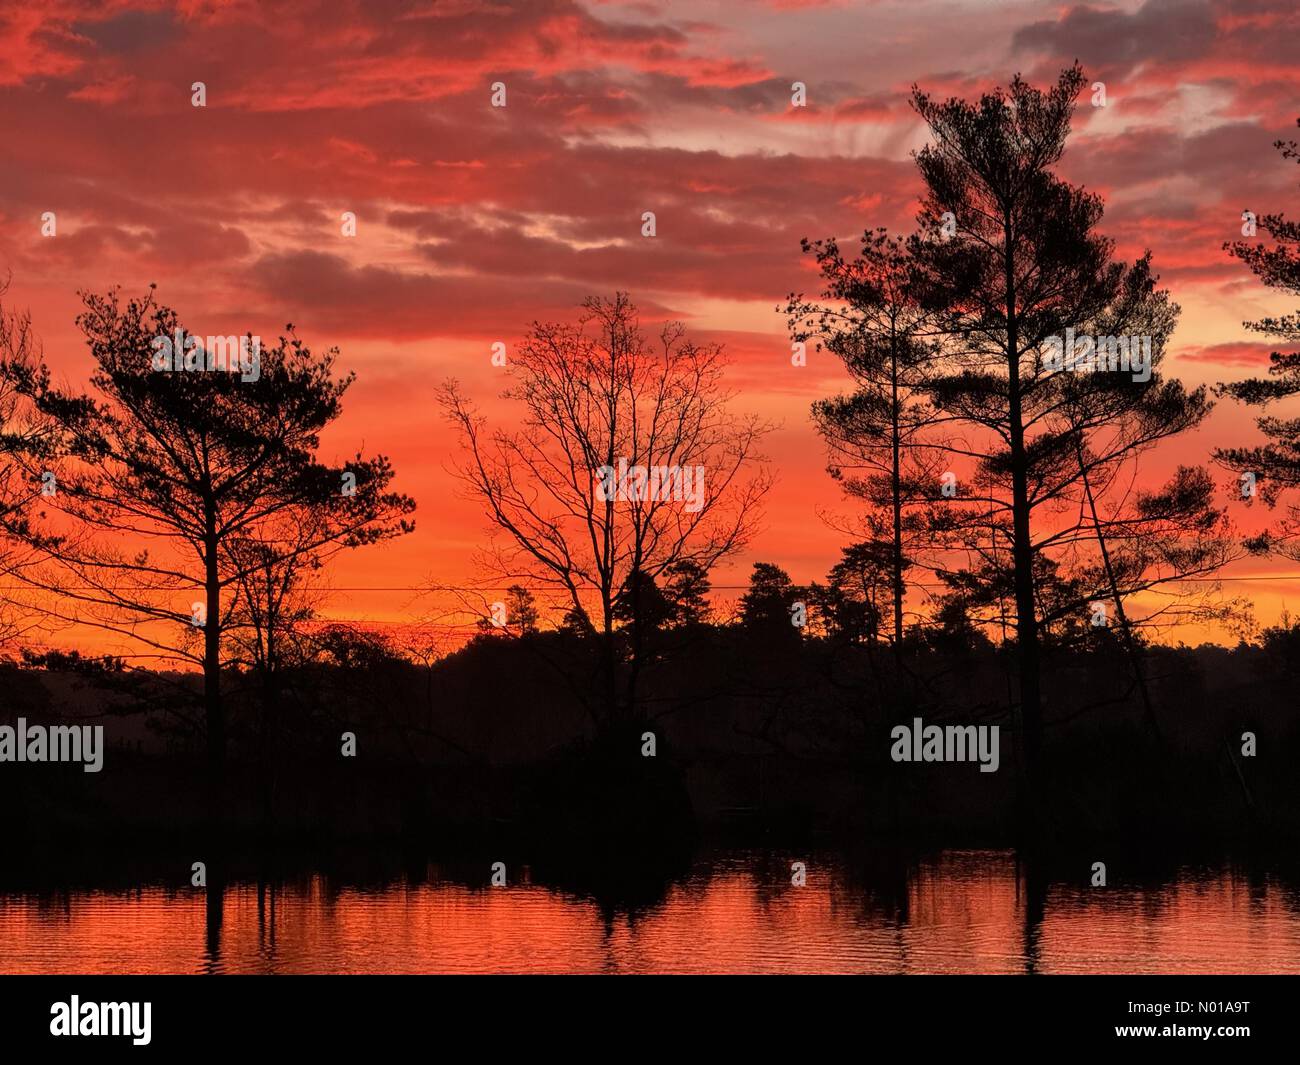 Godalming, Surrey. 28th Jan 2024. UK Weather: Sunrise over Thursley Common. Elstead Moat, Thursley. 28th January 2024. A frosty start to the day for the Home Counties. Sunrise over Thursley Common near Godalming, Surrey. Credit: jamesjagger/StockimoNews/Alamy Live News Stock Photo